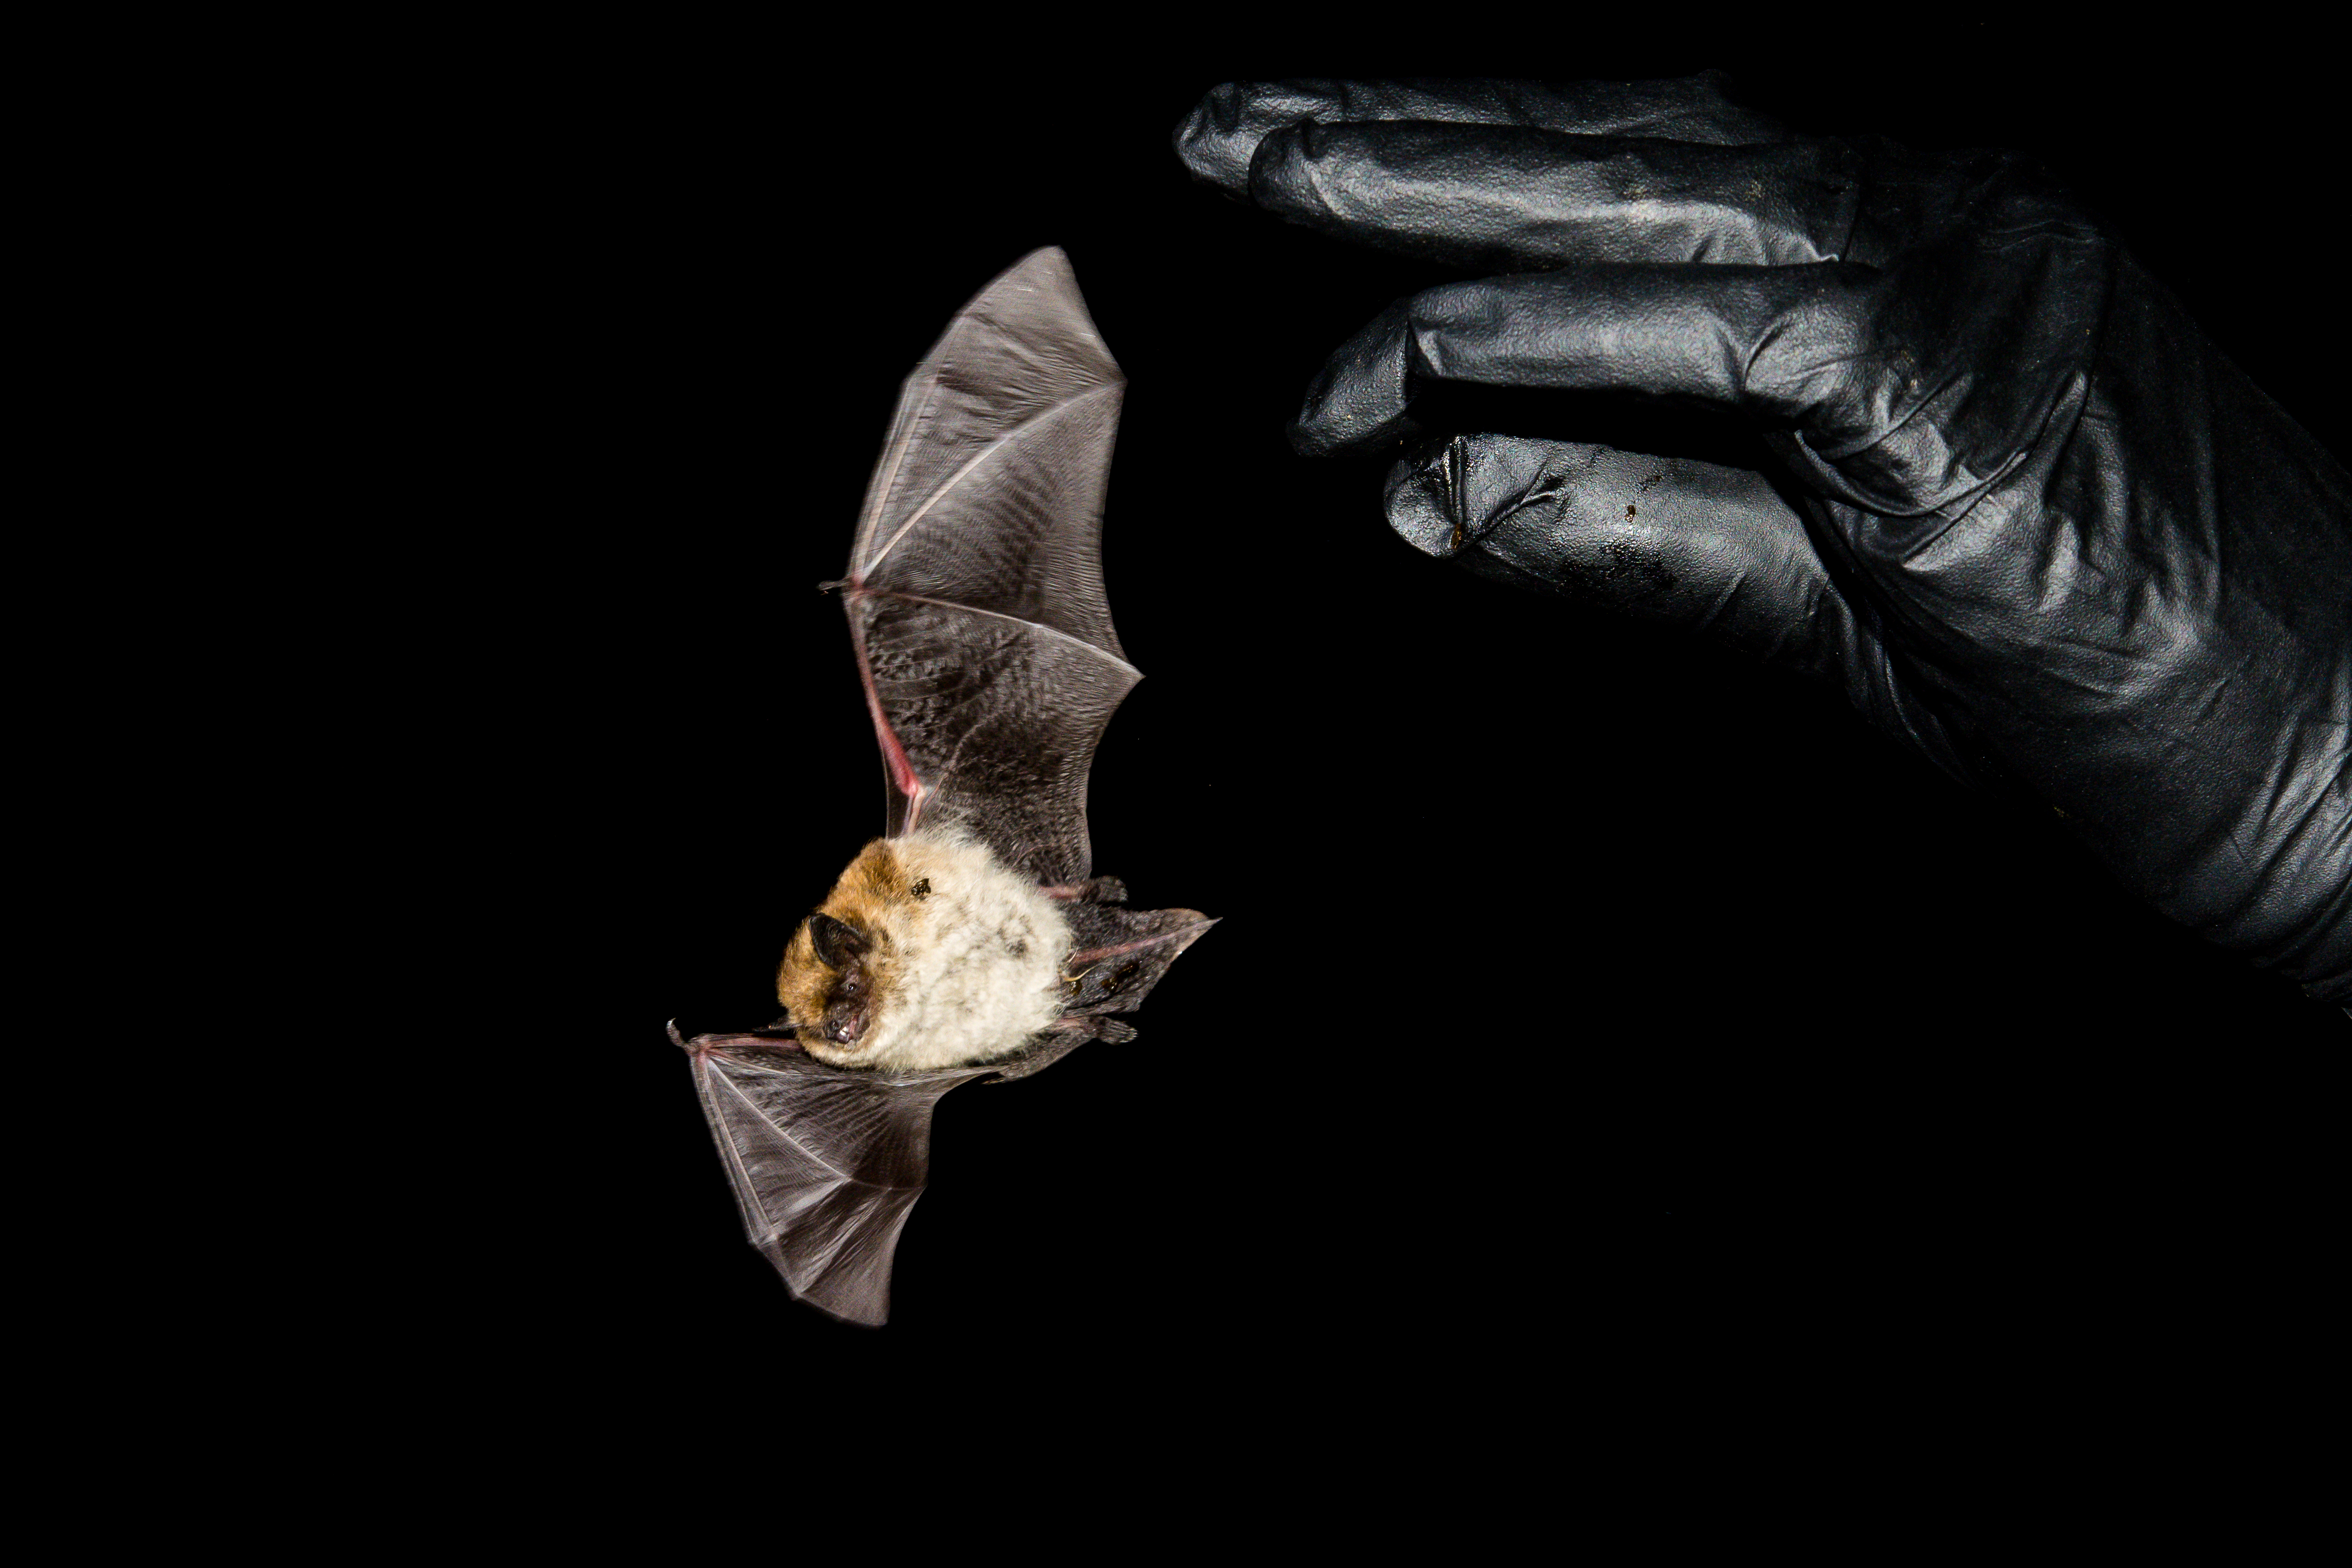 image of bat being released from gloved hand